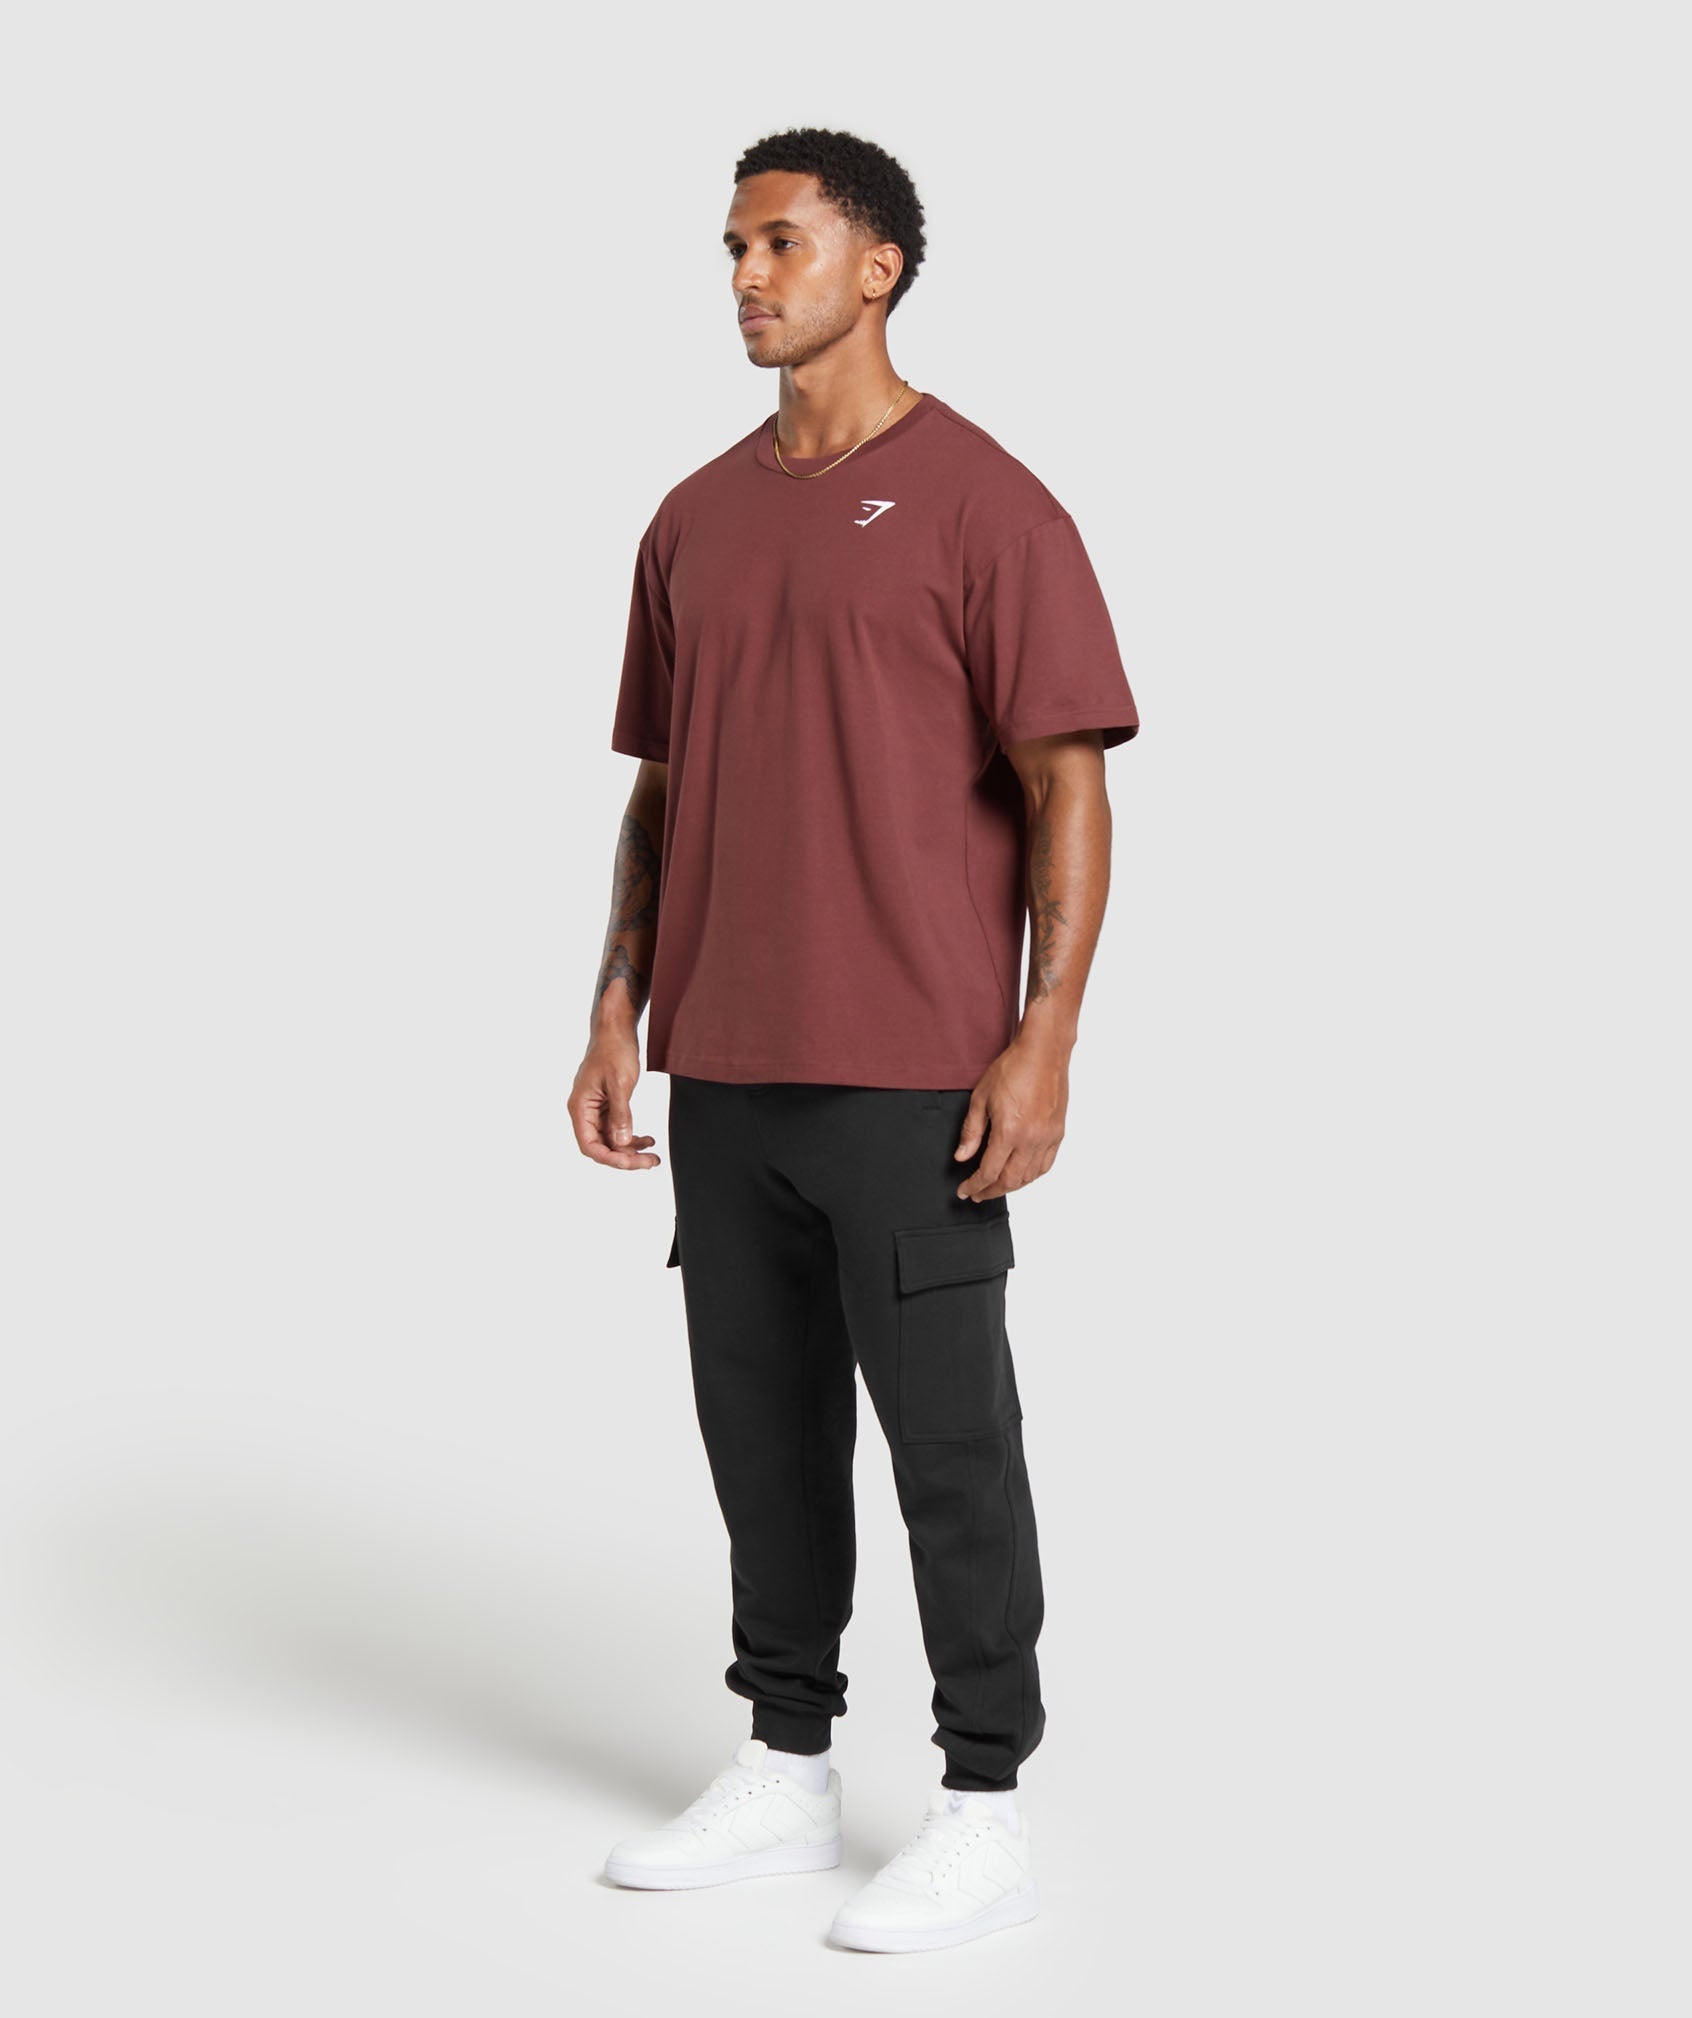 Gymshark Essential Tee - Is it worth the price?